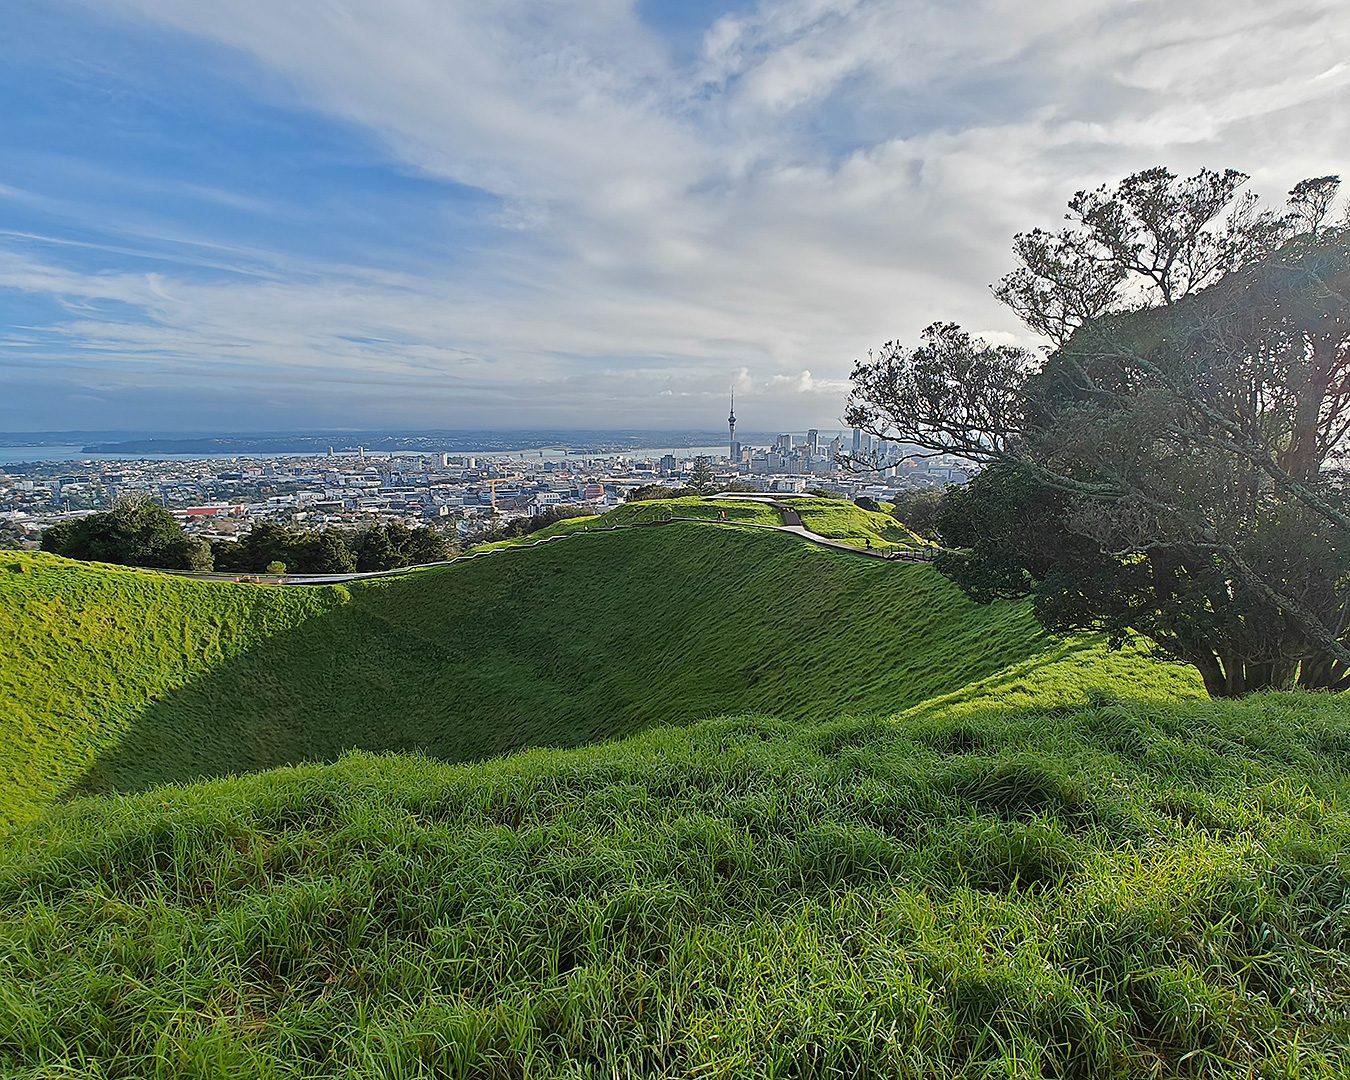 A view from the top of Maungawhau mount Eden.